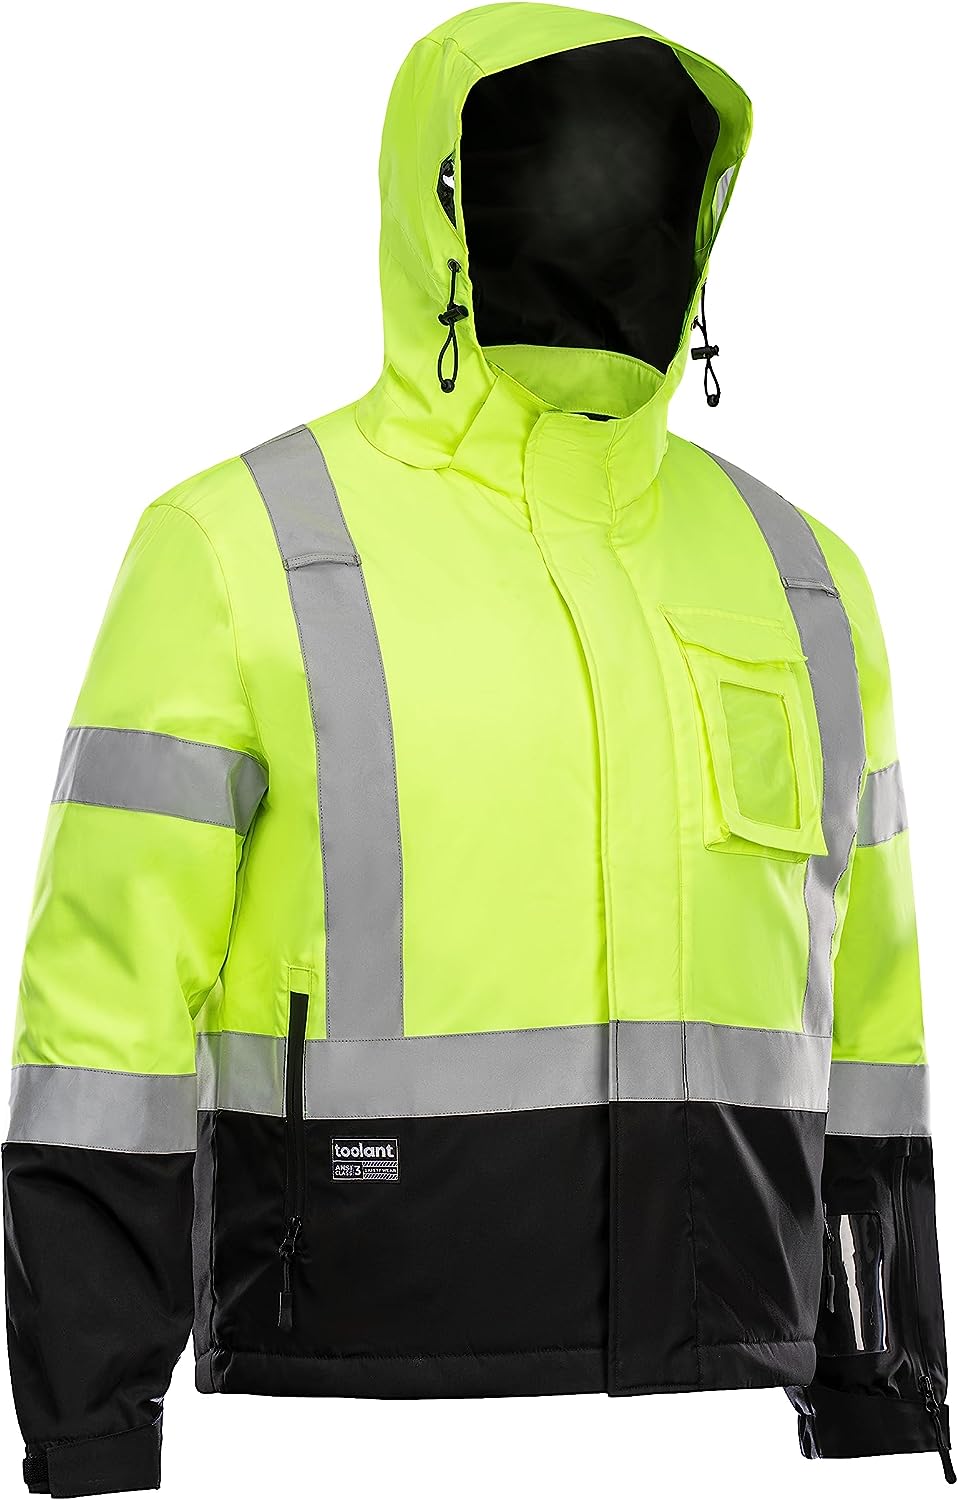 toolant Reflective Waterproof Safety Jacket for Men – High Visibility, Insulated, Comfortable, Multiple Pockets – Designed for Work, Construction, and Outdoor, Yellow, XL